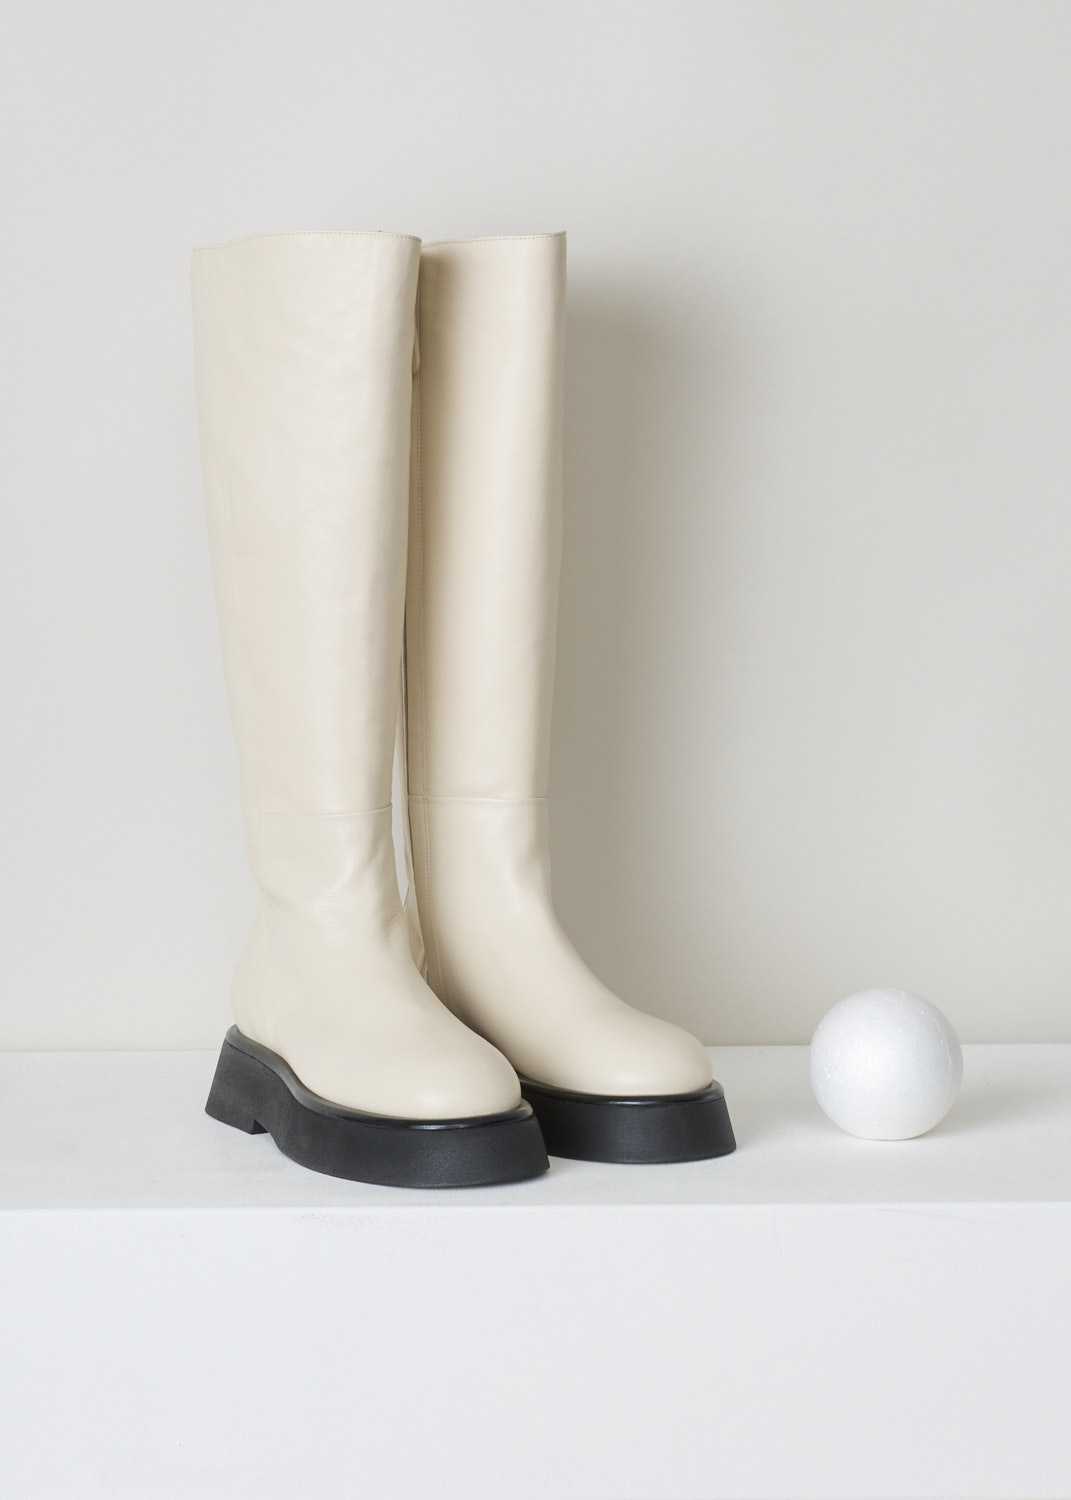 Wandler, Full-length white rosa boot, 21208_601204_1062_moon, white, front, Made out of the softest kind of leather being lambskin, featuring a full length concealed zipper. The thick flat sole flares out a bit, adding power to this minimalistic design. 